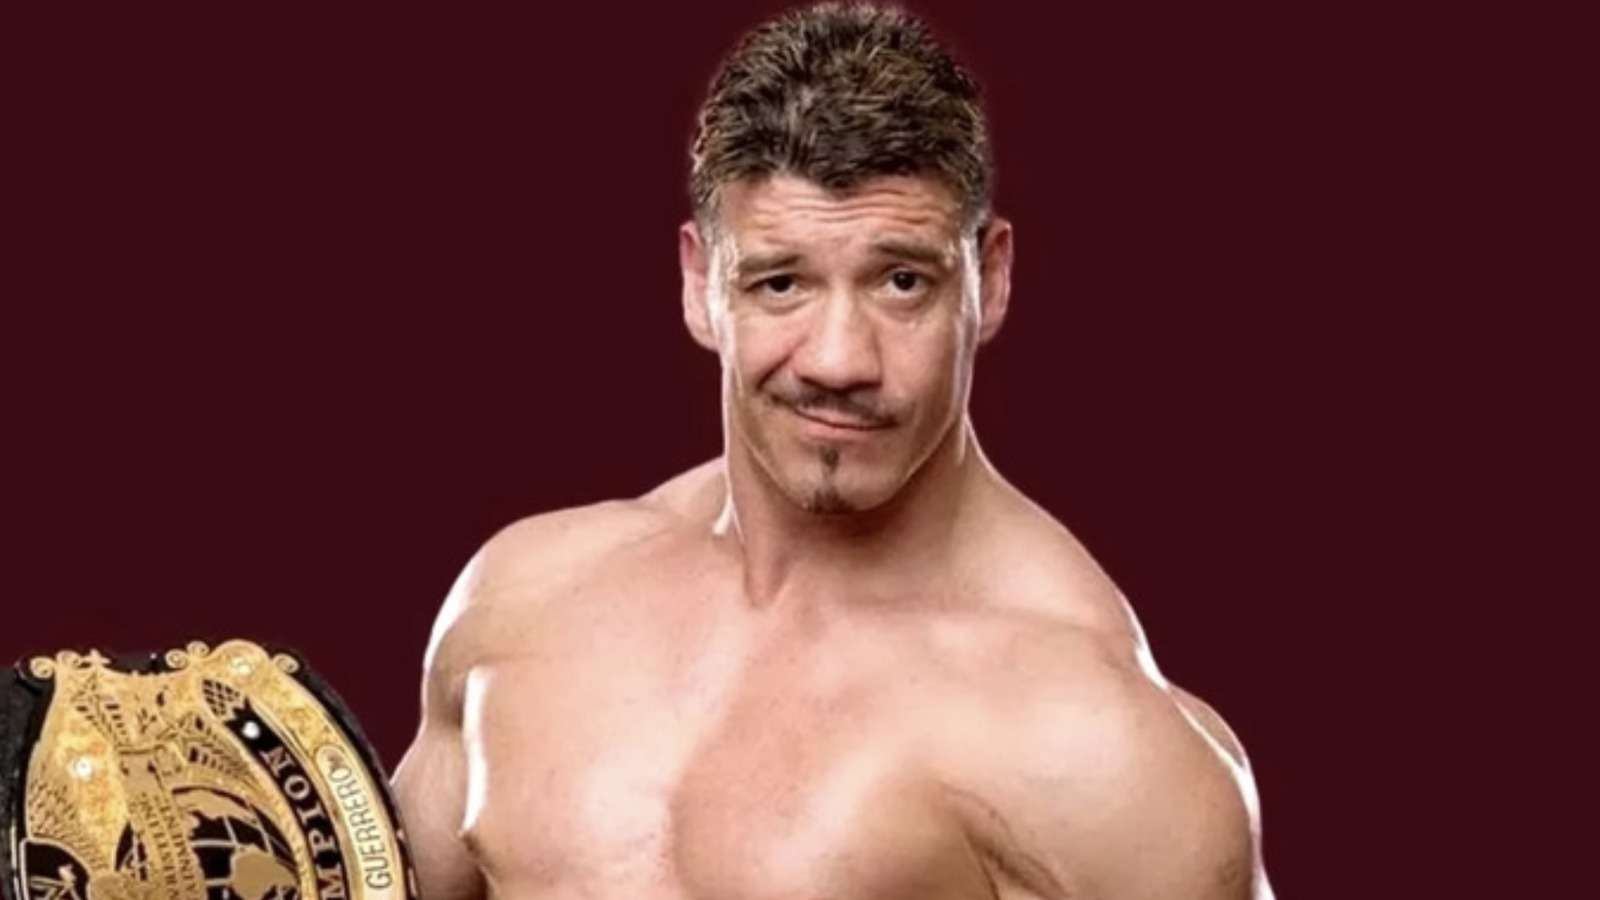 Eddie Guerrero was amongst the most popular fighters of his generation. However, his WWE journey ended in tragedy.